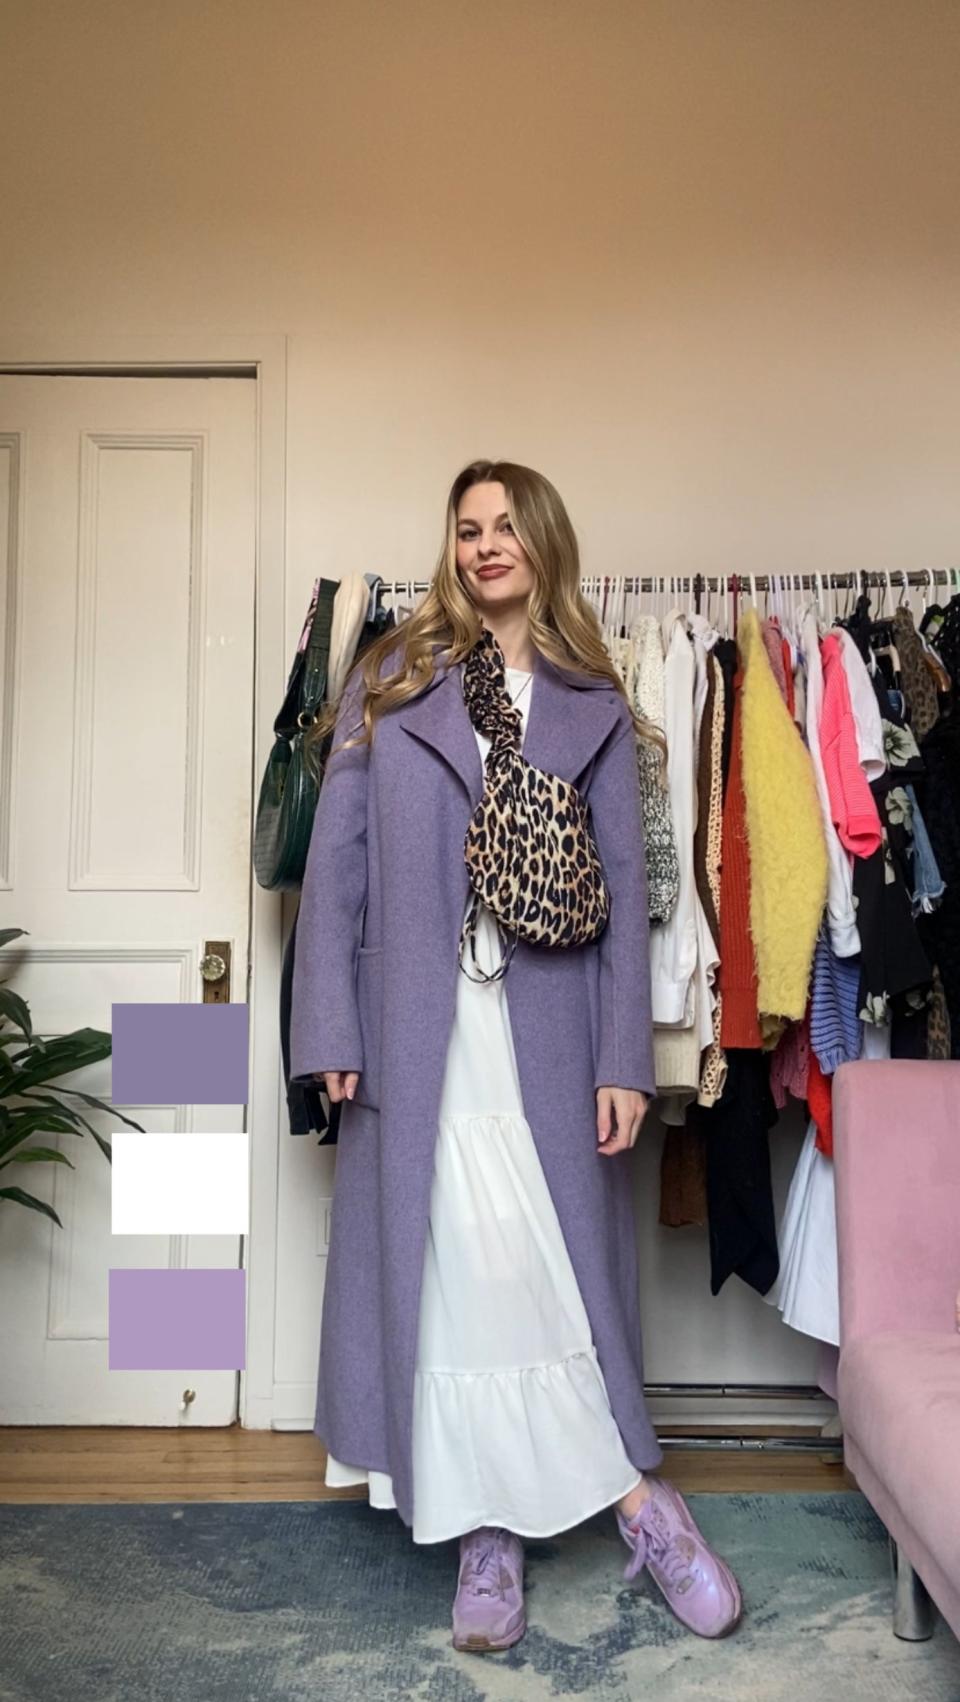 Woman in a long purple coat, leopard print top, and white skirt standing in a room with clothes rack behind